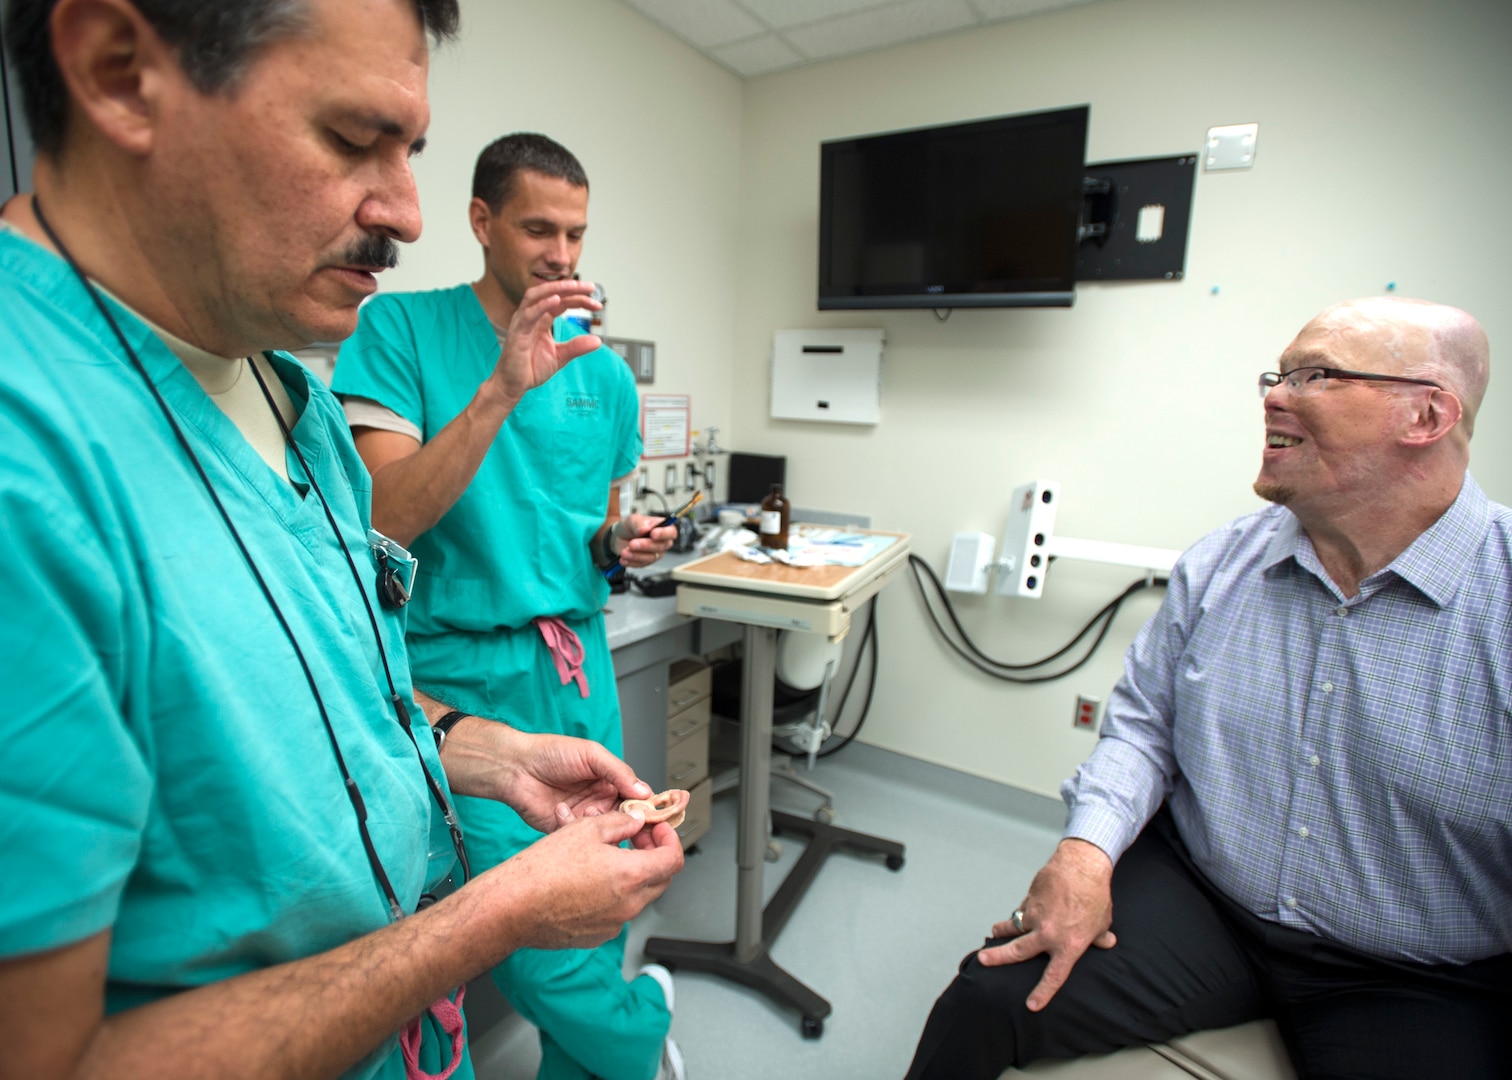 Col. Jose Villalobos (left), 59th Dental Group maxillofacial prosthetics program director, and Maj. Stephen Cherrington (center), 59th Dental Group maxillofacial prosthodontist, discuss retired Army Master Sgt. Todd Nelson’s new prosthetic ear at the San Antonio Military Medical Center, Joint Base San Antonio-Fort Sam Houston, Texas, June 28. The 59th Medical Wing's Maxillofacial Prosthetics Department is one of only a few in the Department of Defense that creates prosthetic body parts, such as eyes, ears and noses. (U.S. Air Force photo/Staff Sgt. Kevin Iinuma)